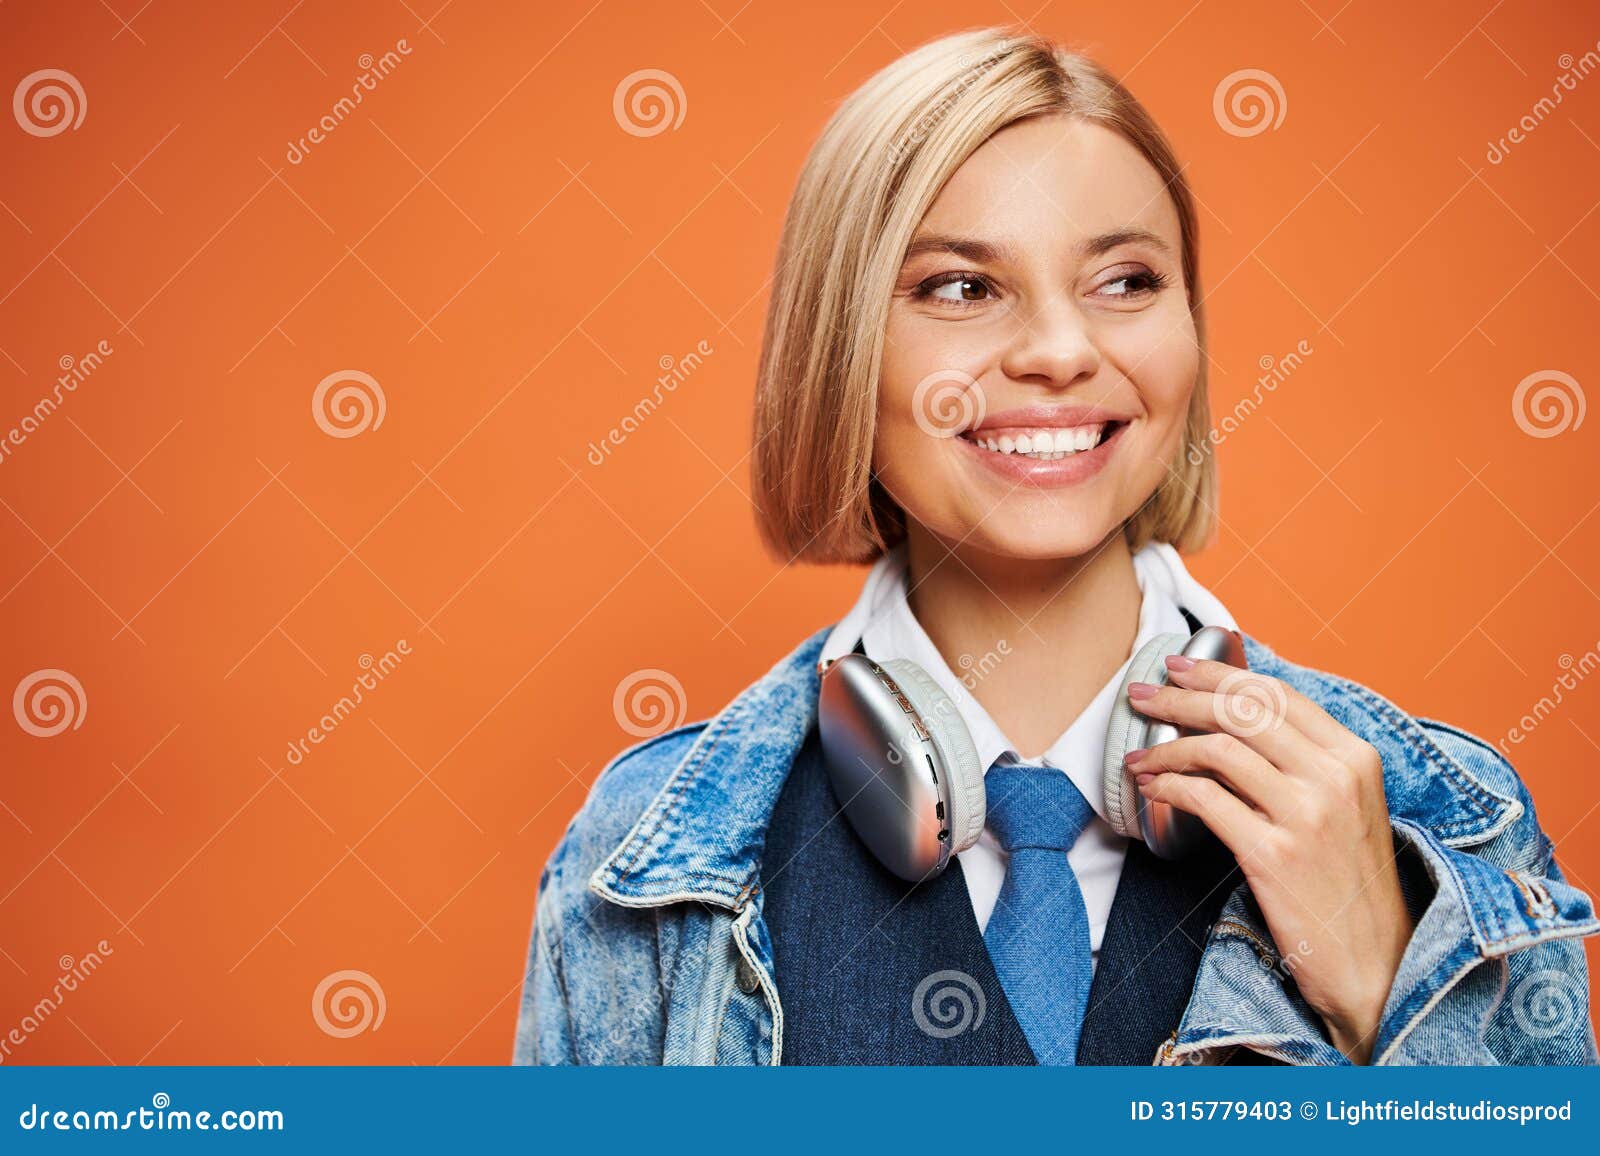 joyous appealing woman with blonde hair